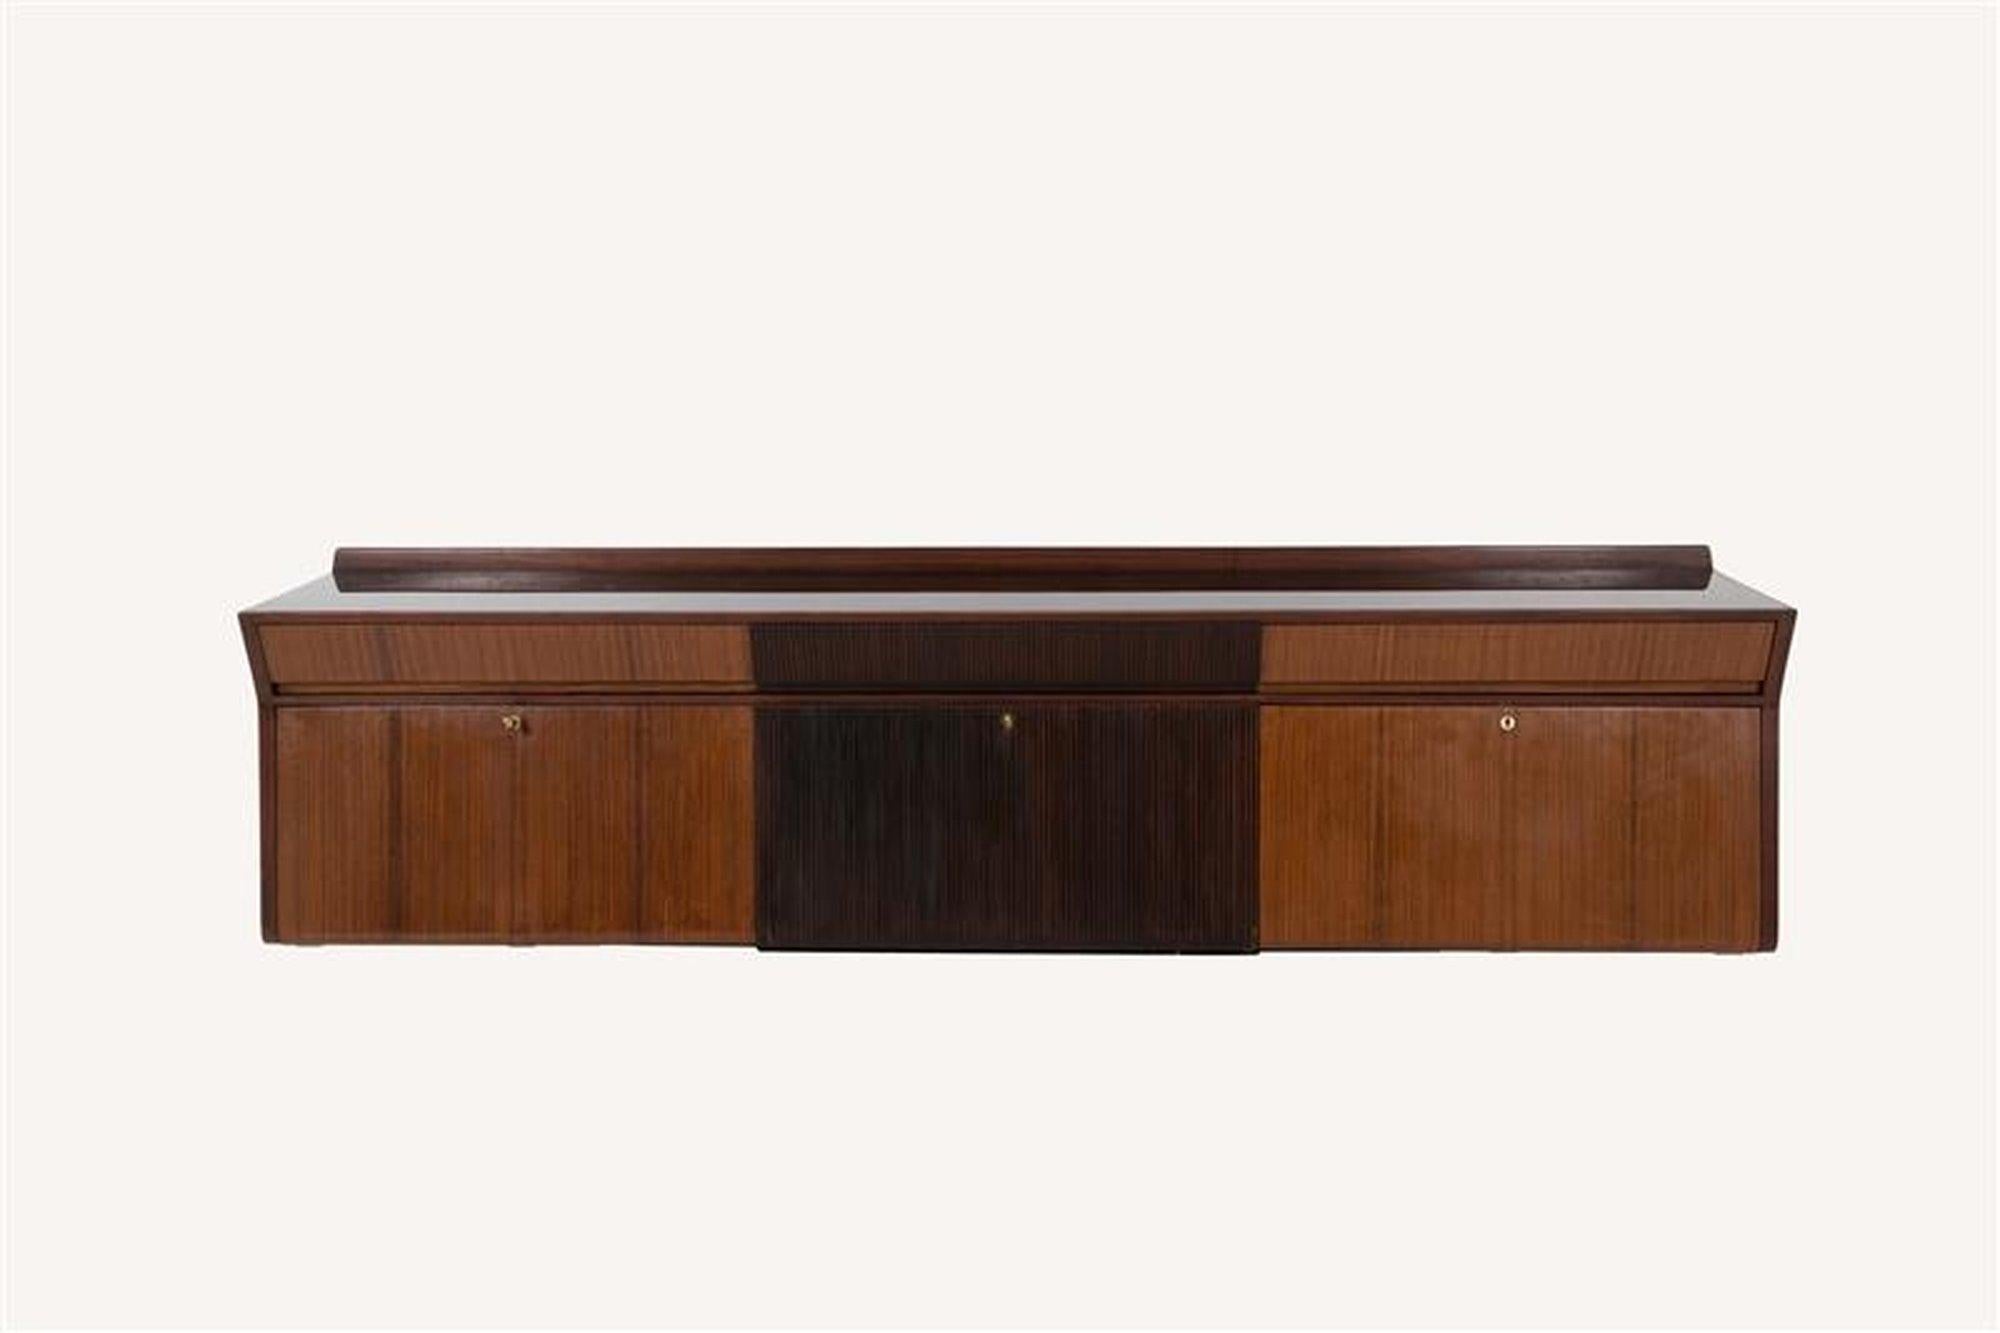 Attributed to Osvaldo Borsani (1911-1985) for Arredamenti Borsani sideboard with bar Italy, 1940s rosewood, wood, brass, black glass, mirrored glass unmarked

Cabinet features three upper drawers and three drop-down doors concealing open shelving